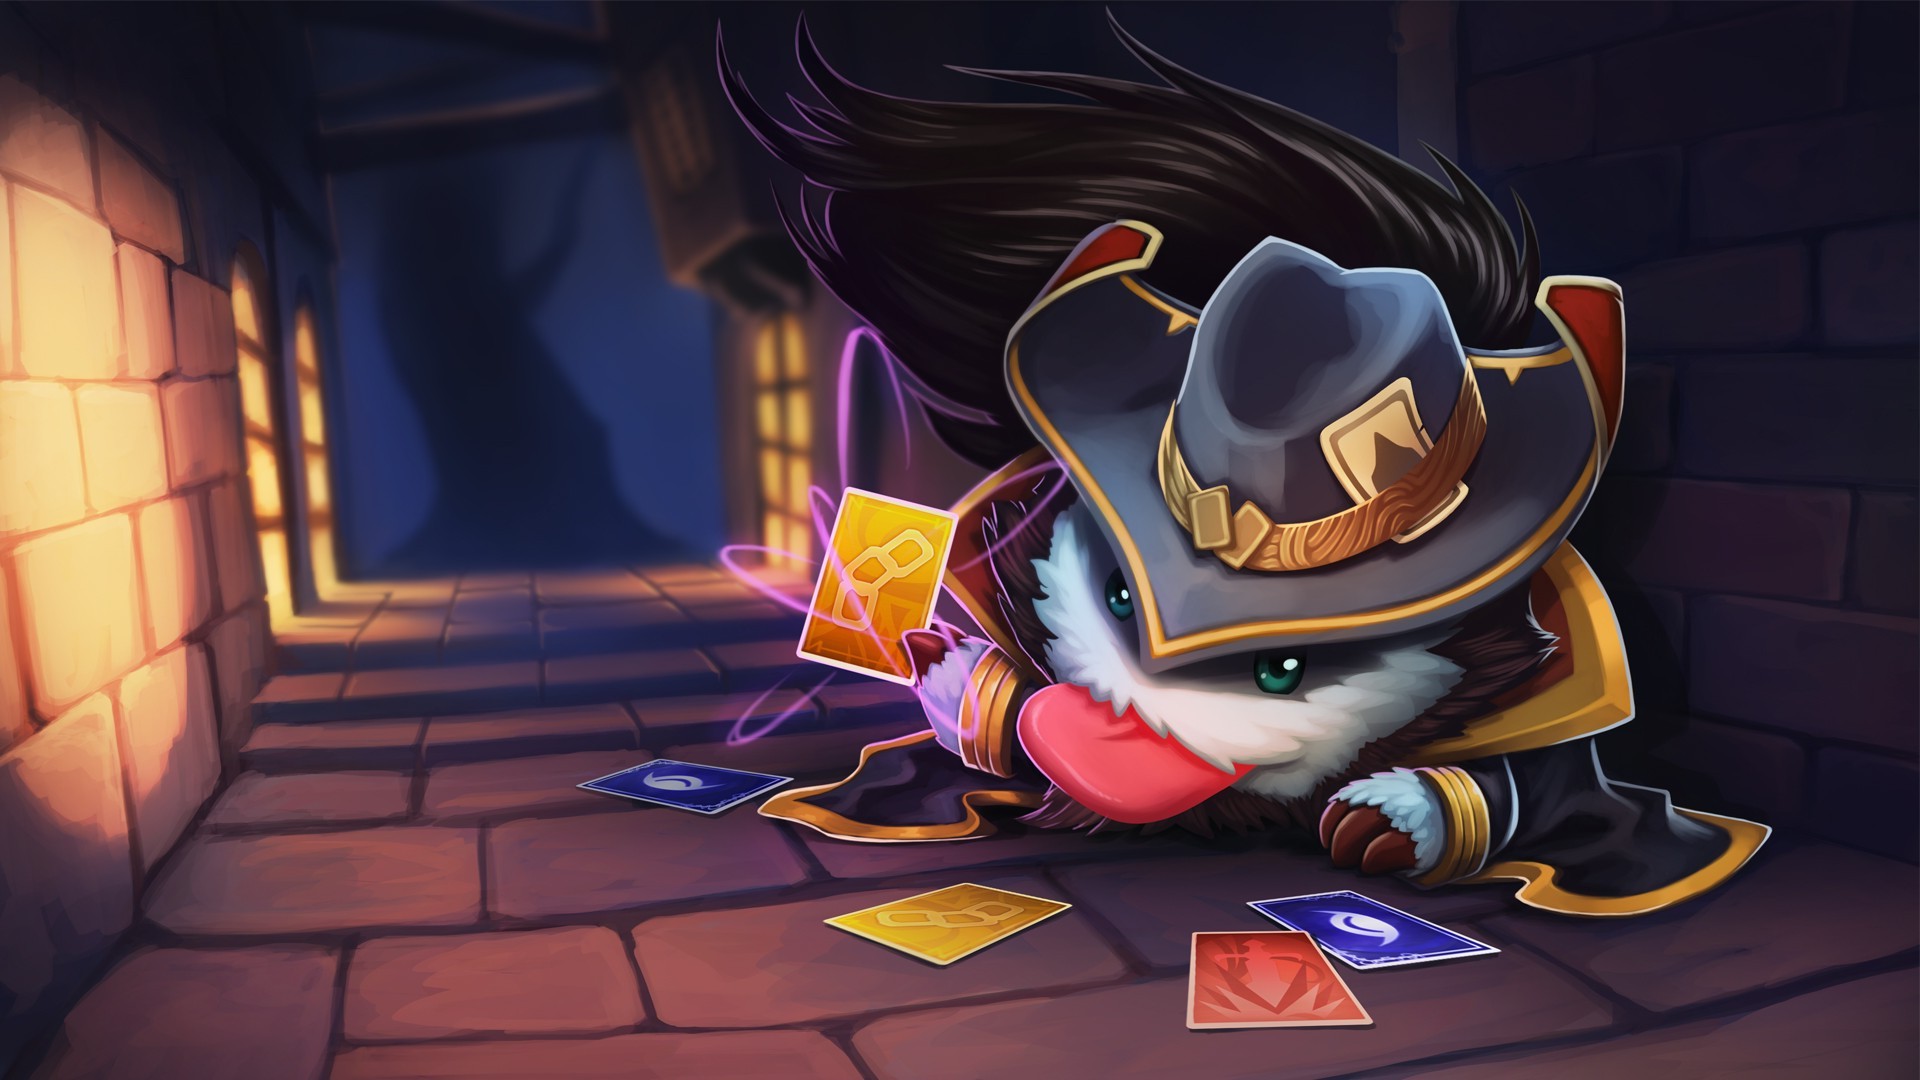 IYH37 Twisted Fate Background   Widescreen Wallpapers